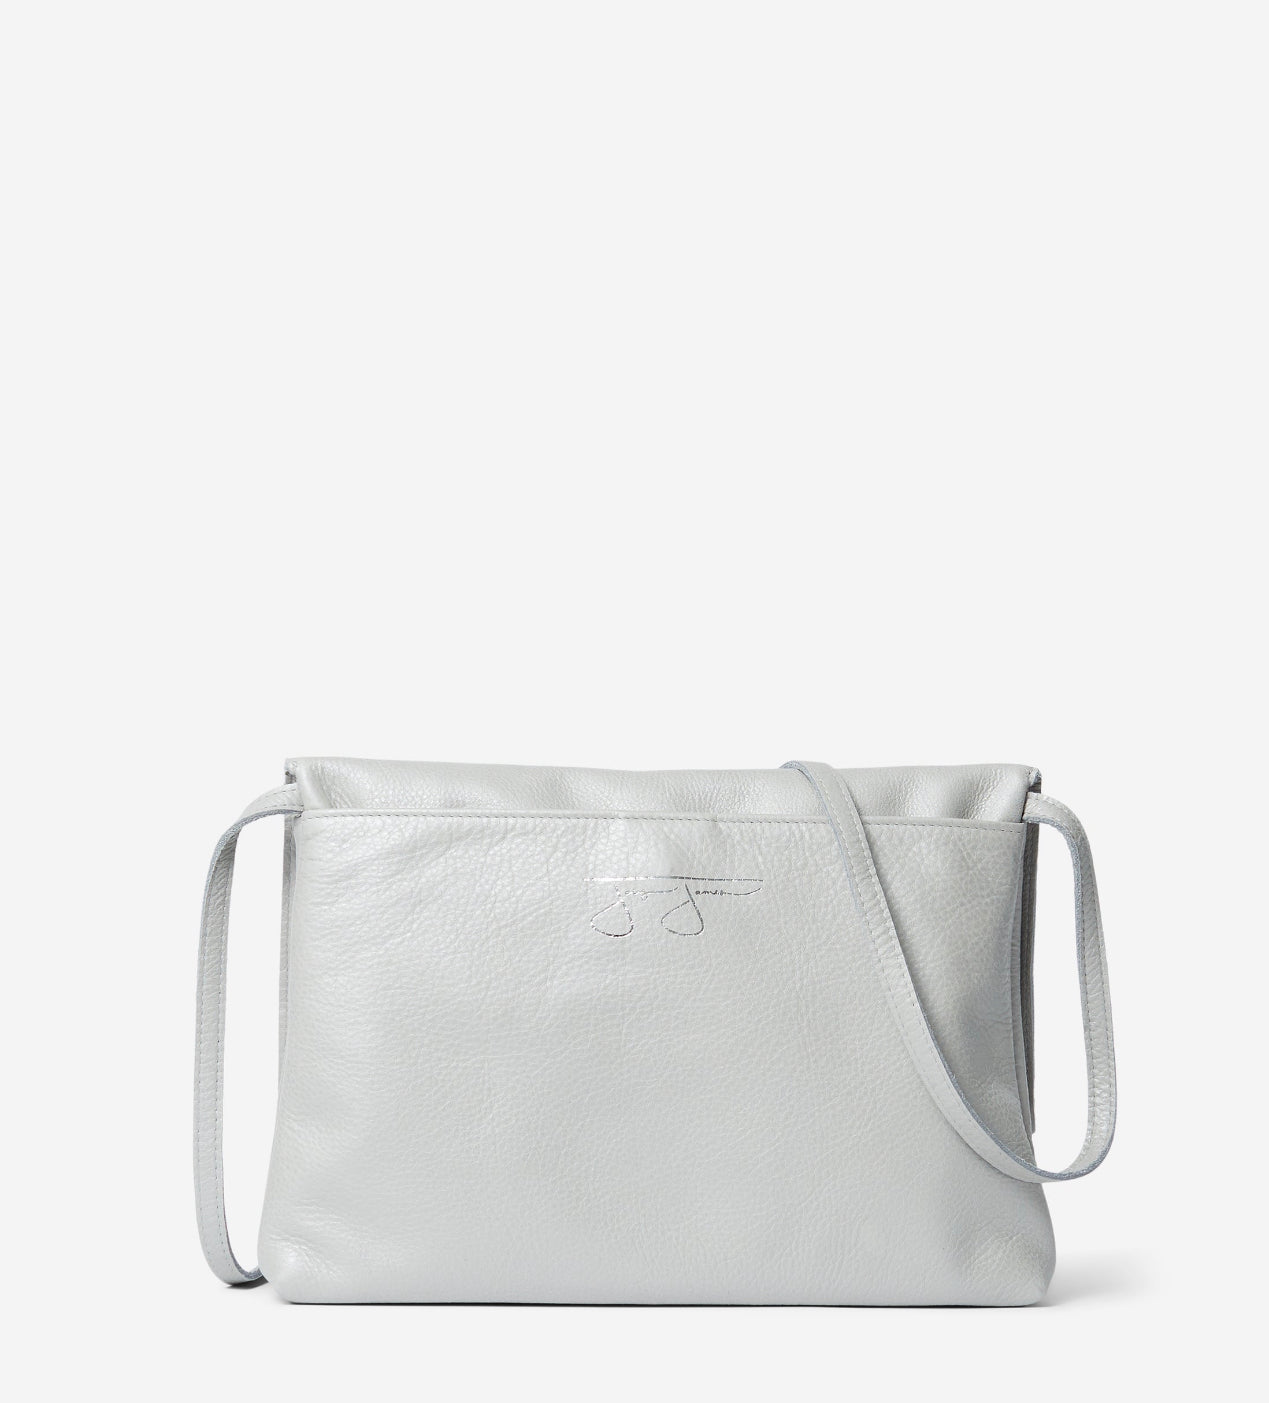 Becky Bag - Silver Becky Bag Joey James, The Label   